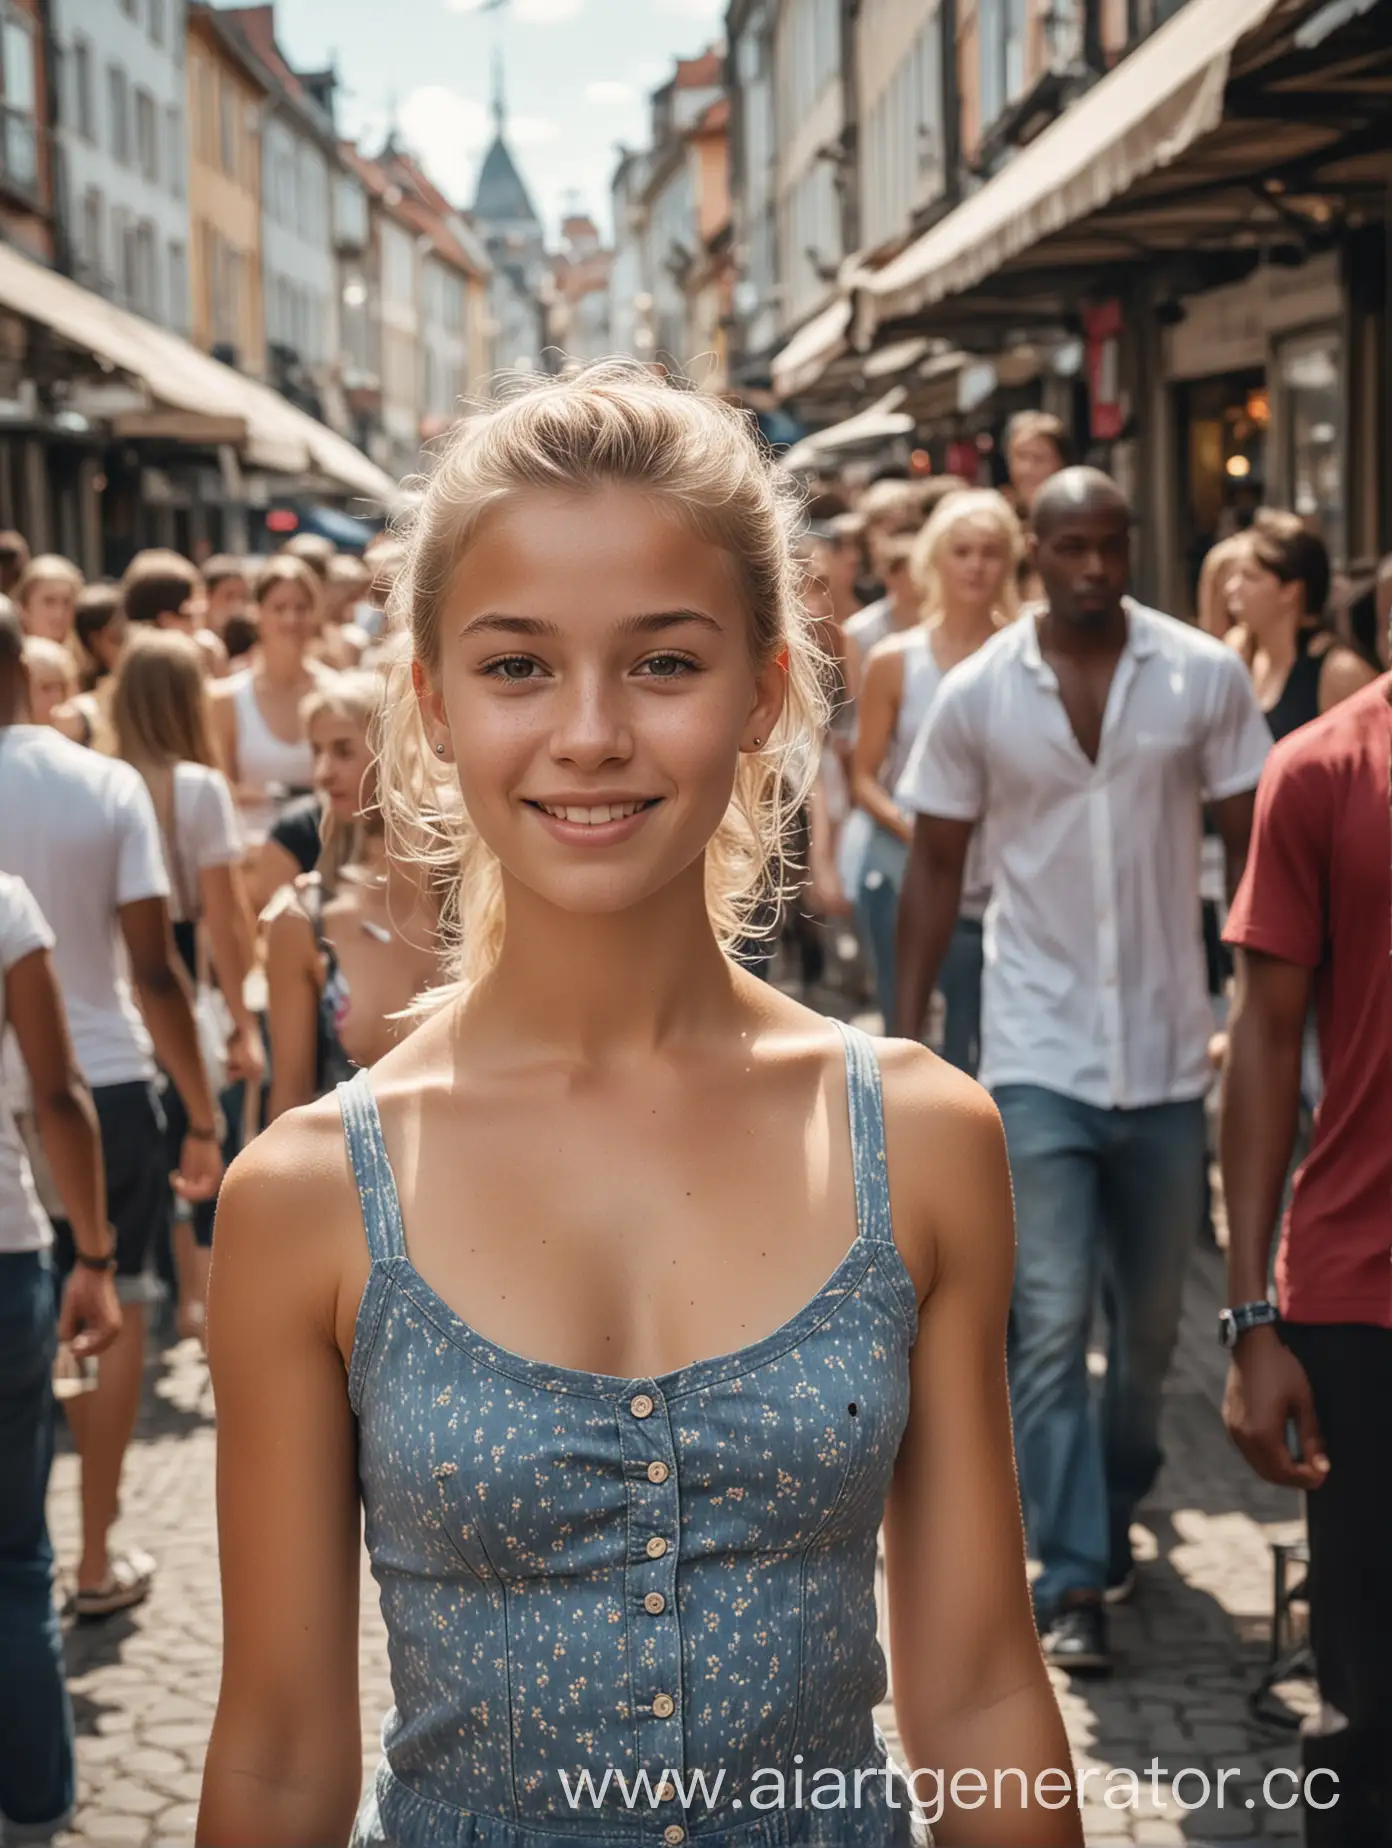 raw photo of a beautiful 15-year-old Norwegian woman, midweight, hourglass figure, surrounded by black men, on a crowded street market, happy, hot summer day, candid, dynamic, full shot, cinematic, natural lighting, 32k, intricately detailed, sharp focus, fine texture, DSLR, 35mm, f8